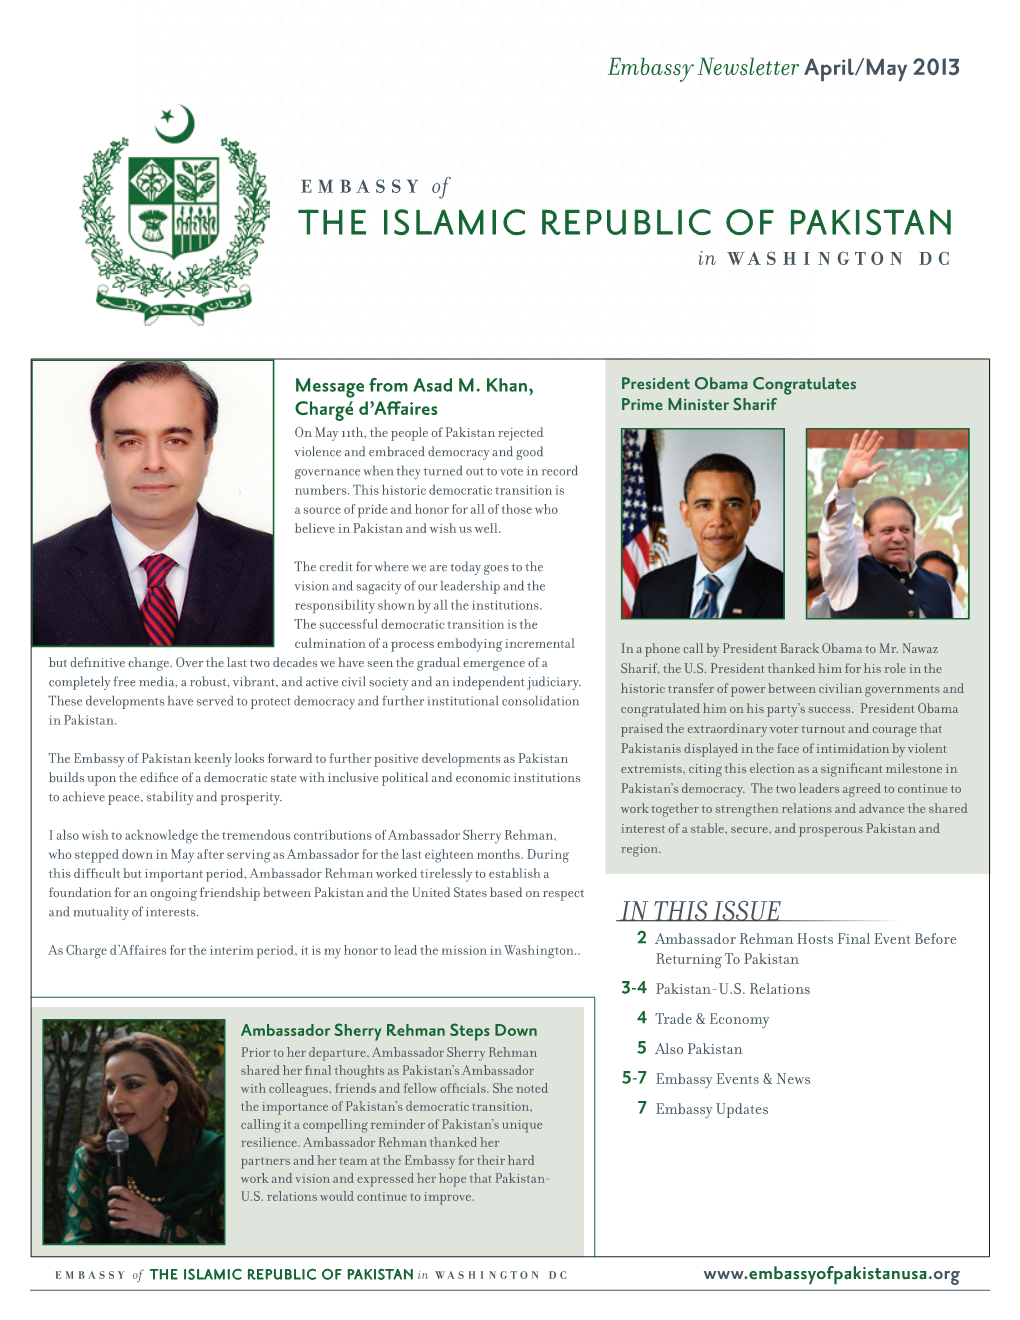 IN THIS ISSUE 2 Ambassador Rehman Hosts Final Event Before As Charge D’Affaires for the Interim Period, It Is My Honor to Lead the Mission in Washington